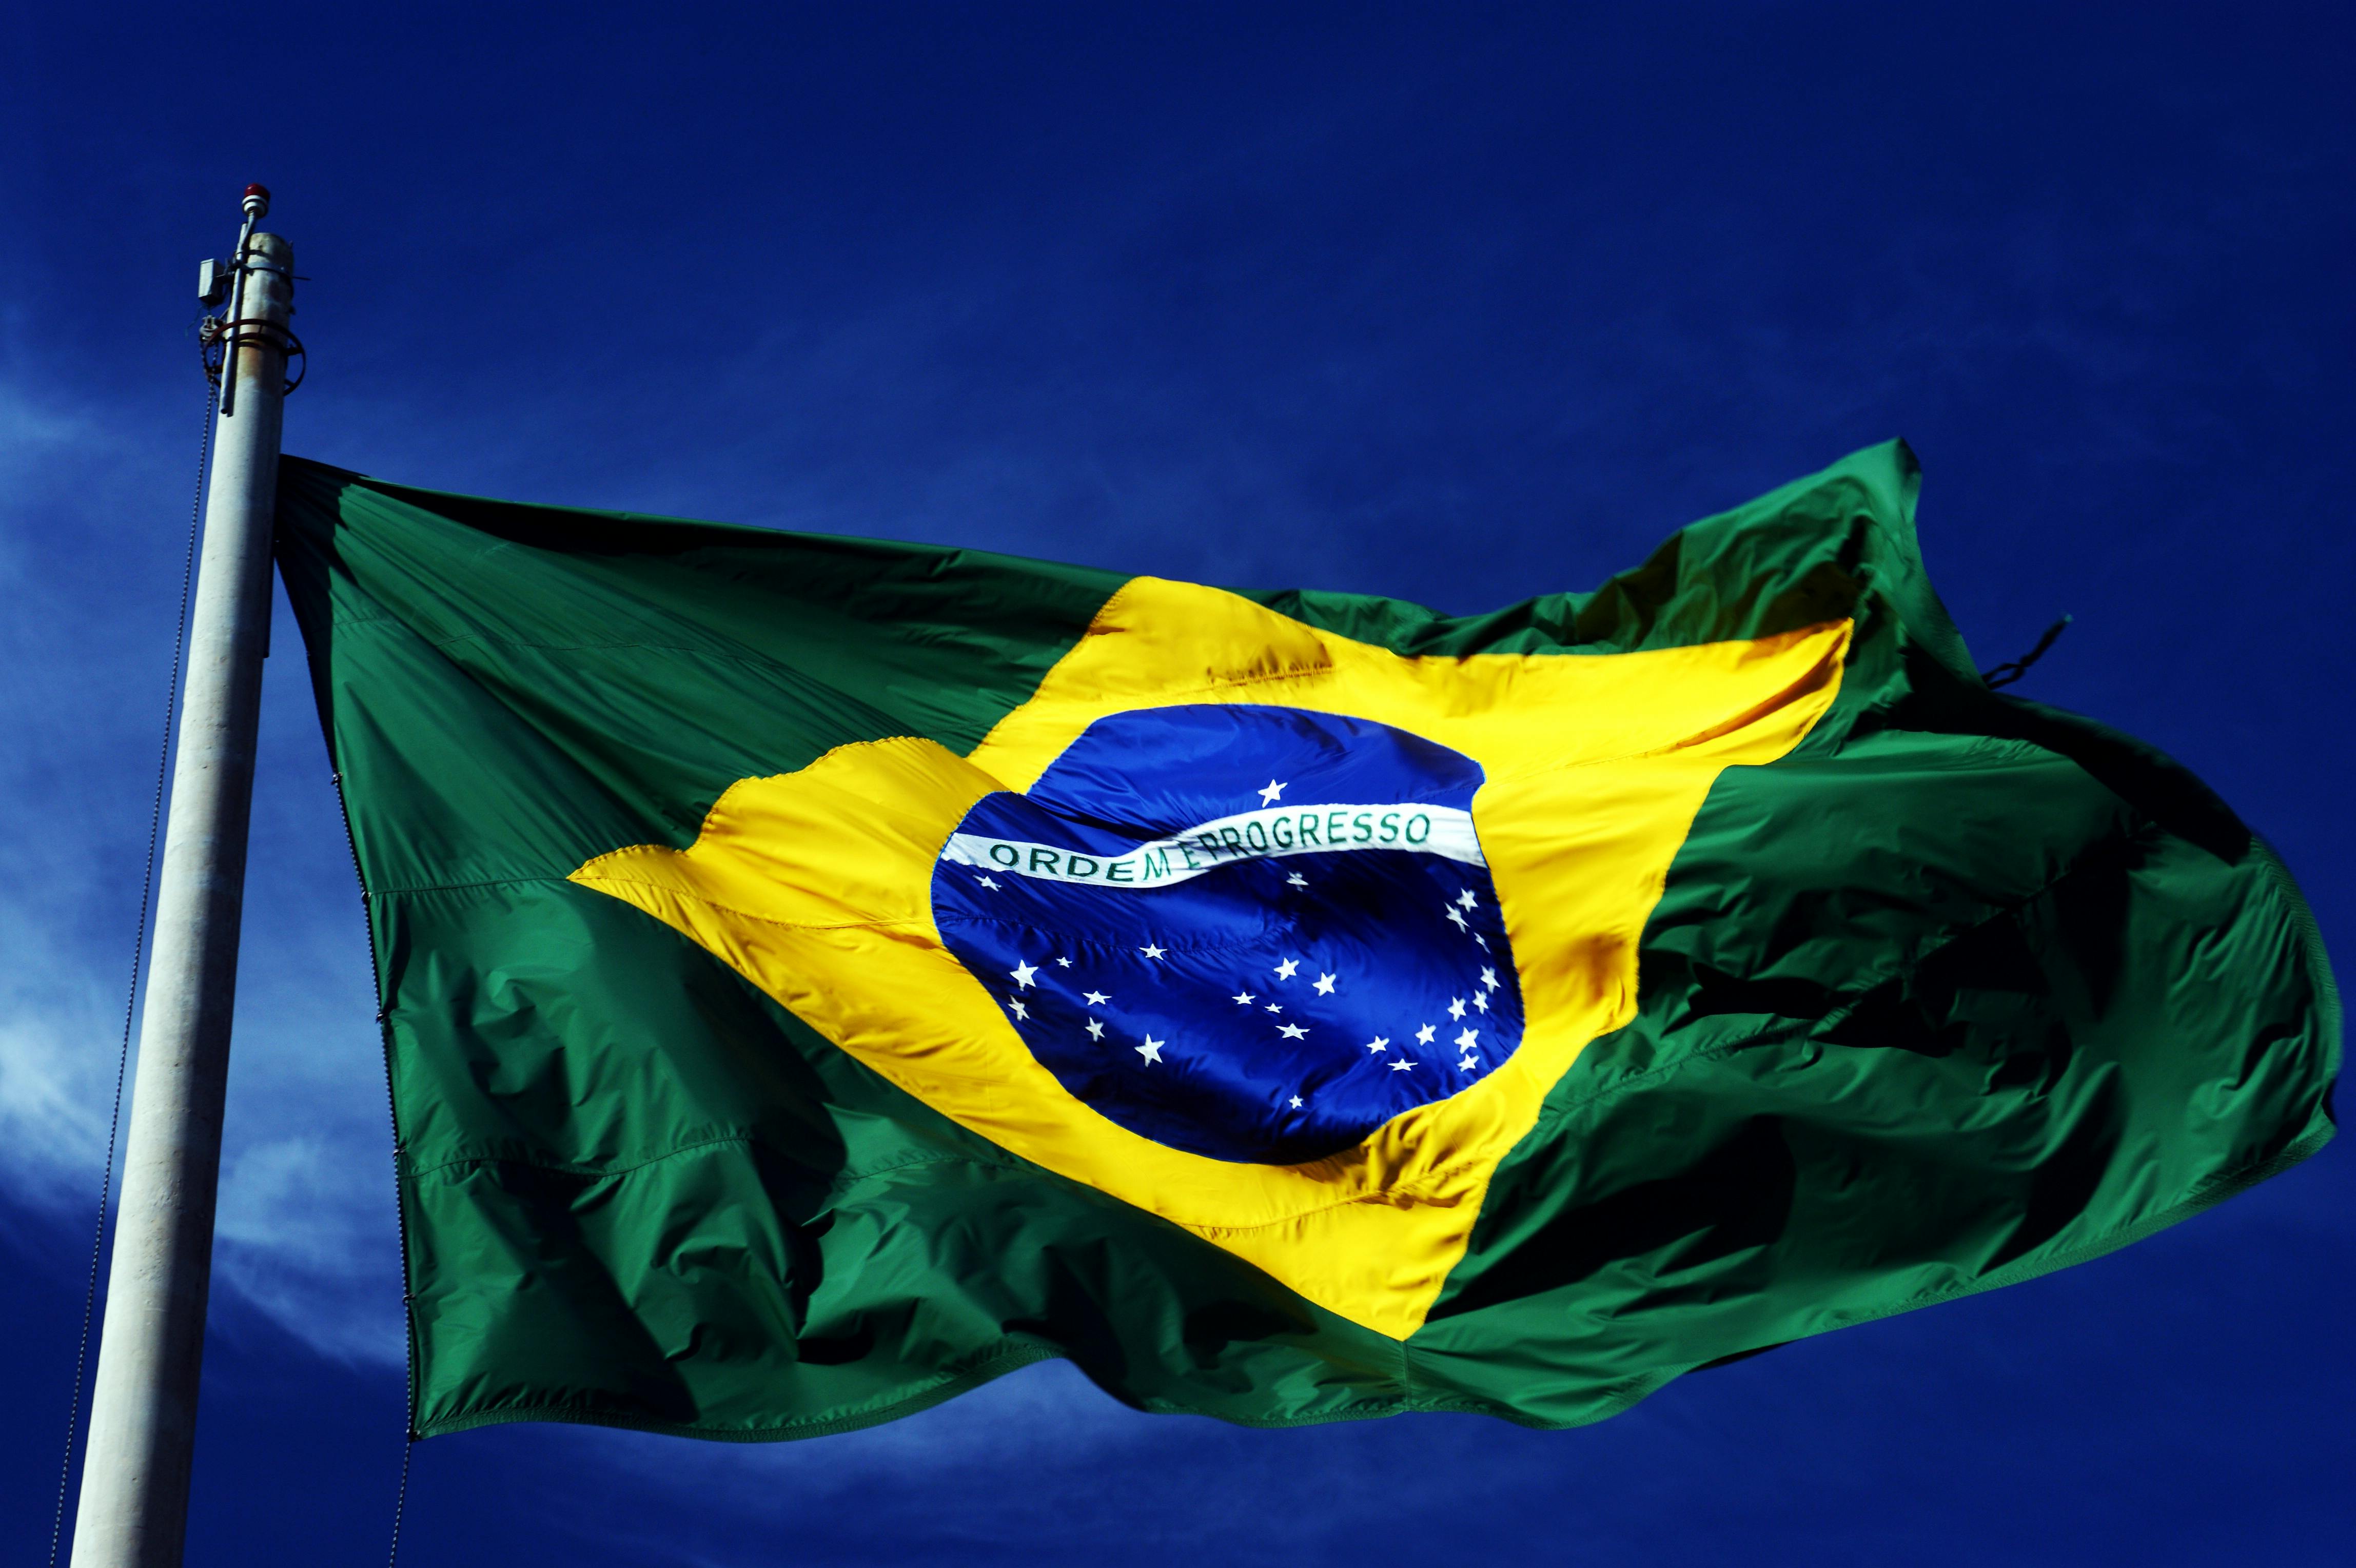 Brazil Flag wallpaper by lovey  Download on ZEDGE  a187